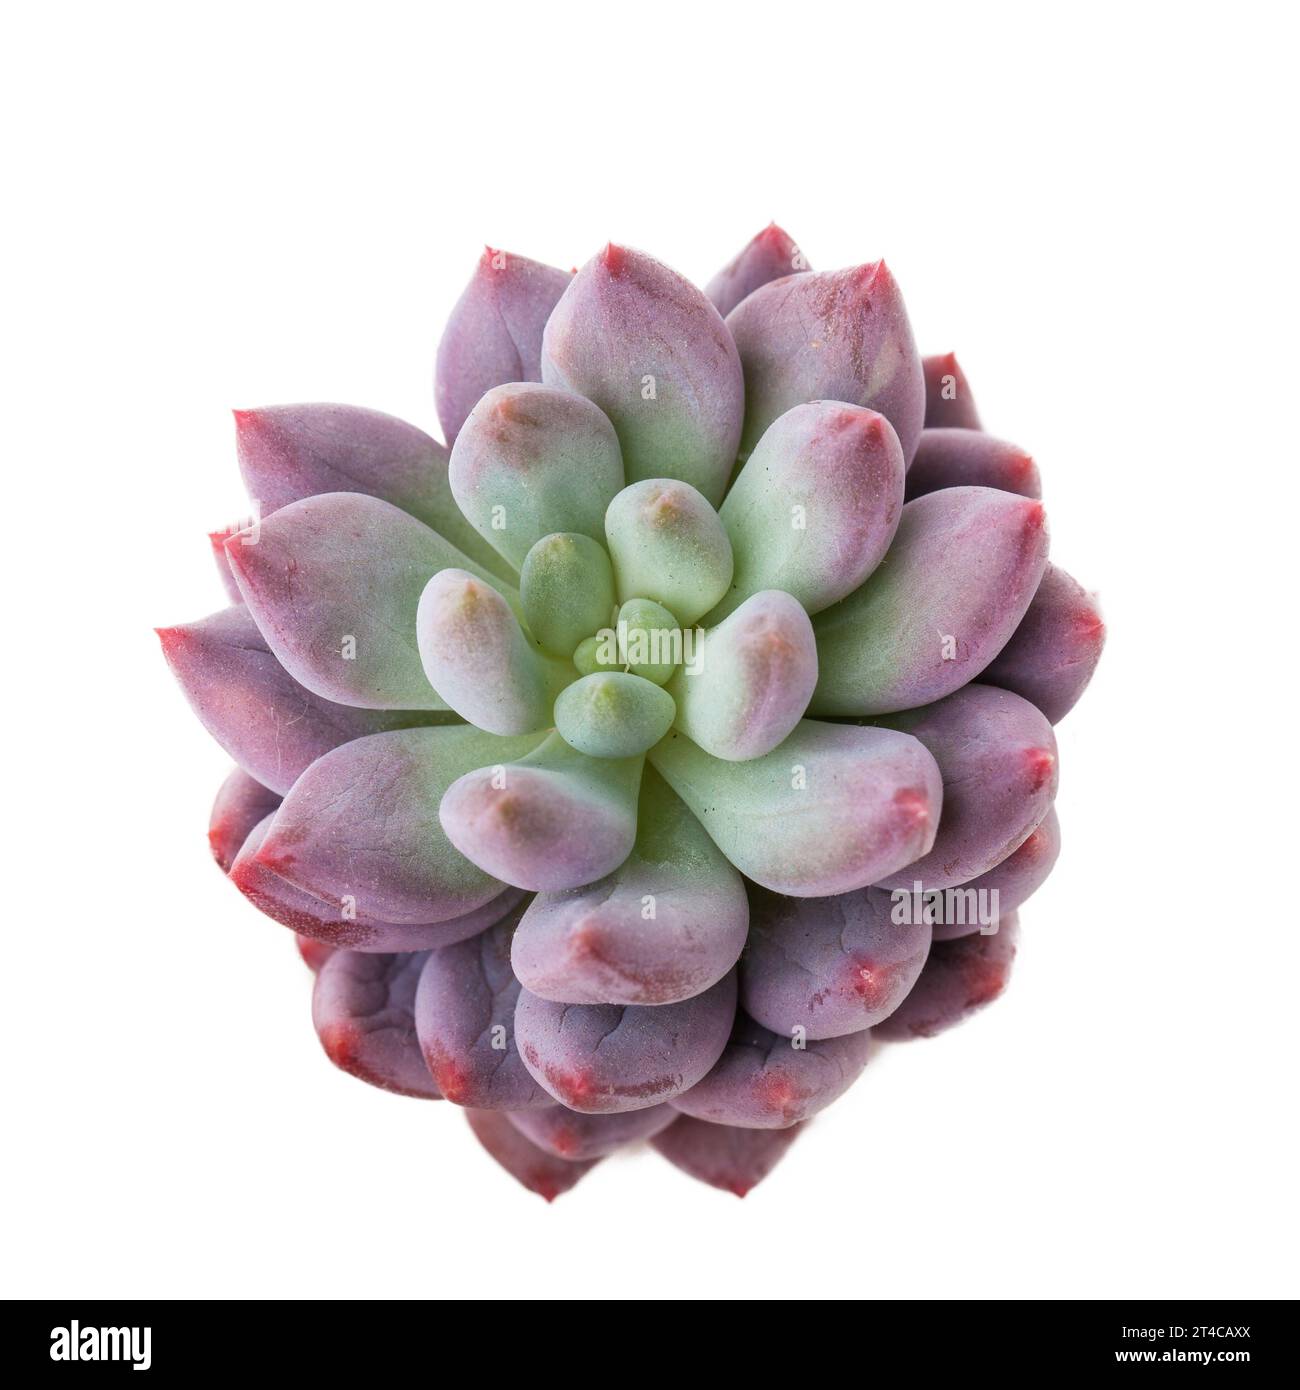 Succulent houseplant flower rosette Pachyphytum Angel Fingers isolated over white background, top view Stock Photo